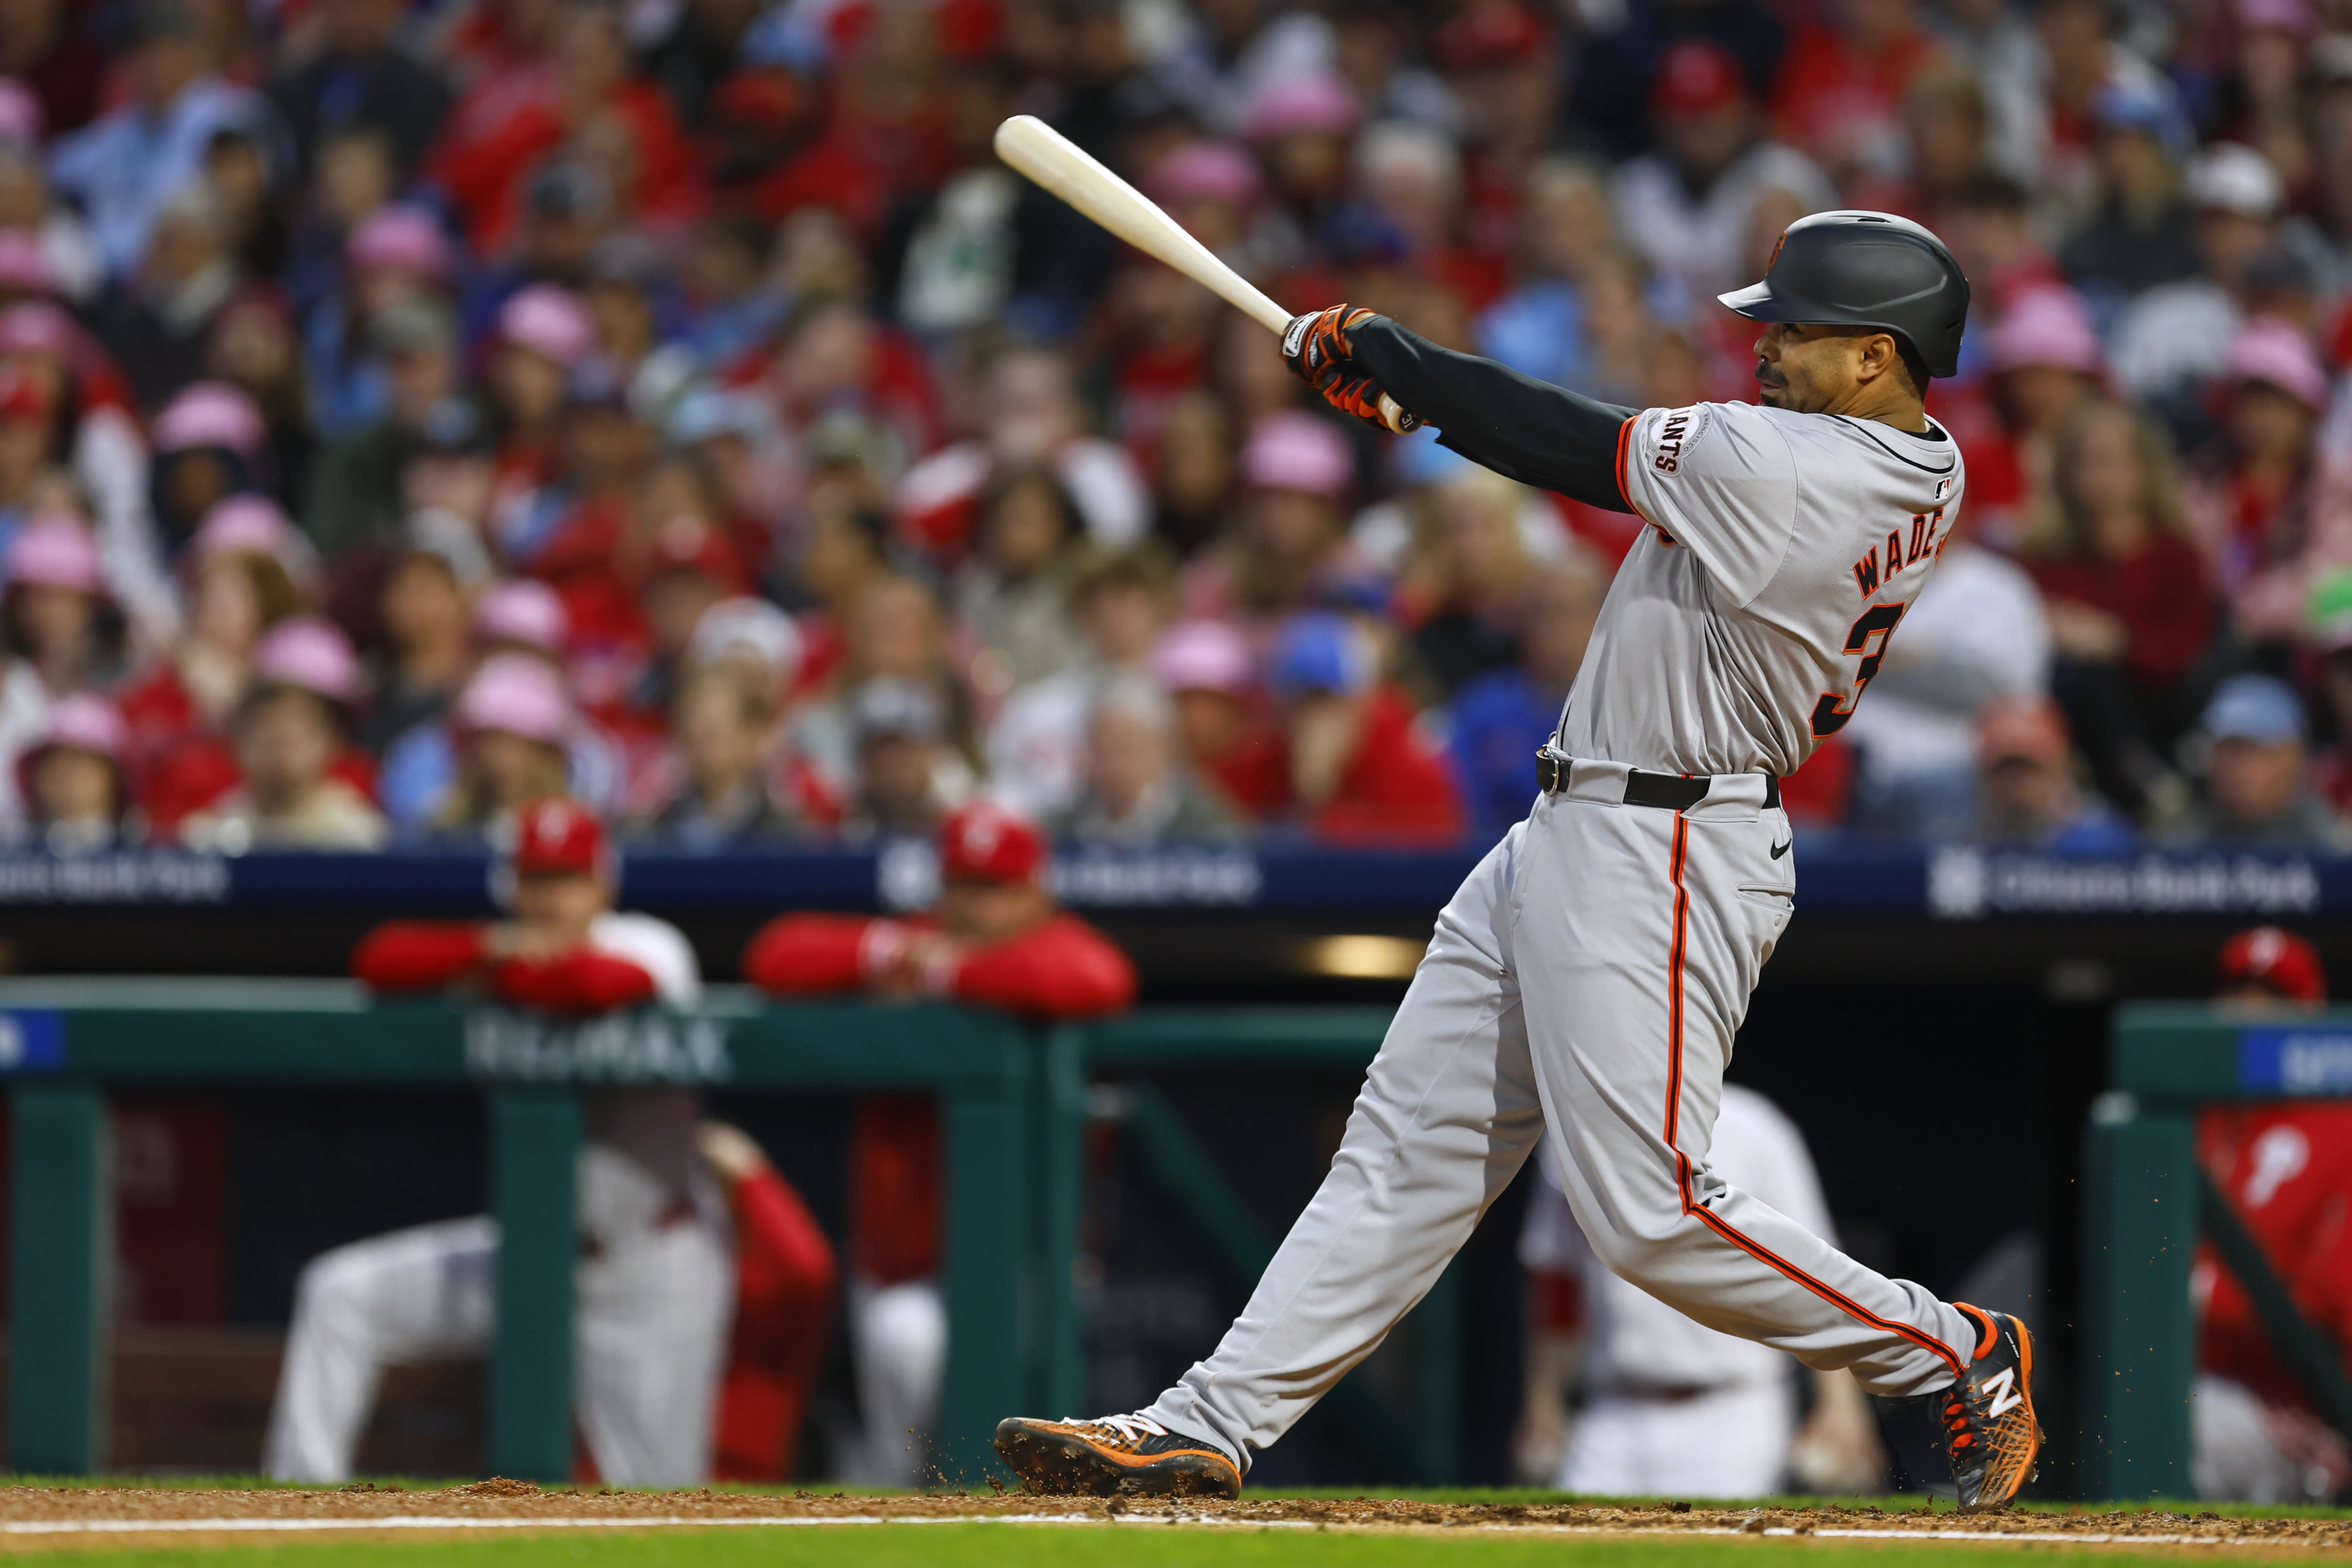 LaMonte Wade Jr. proving to the most reliable part of the revamped San Francisco Giants lineup